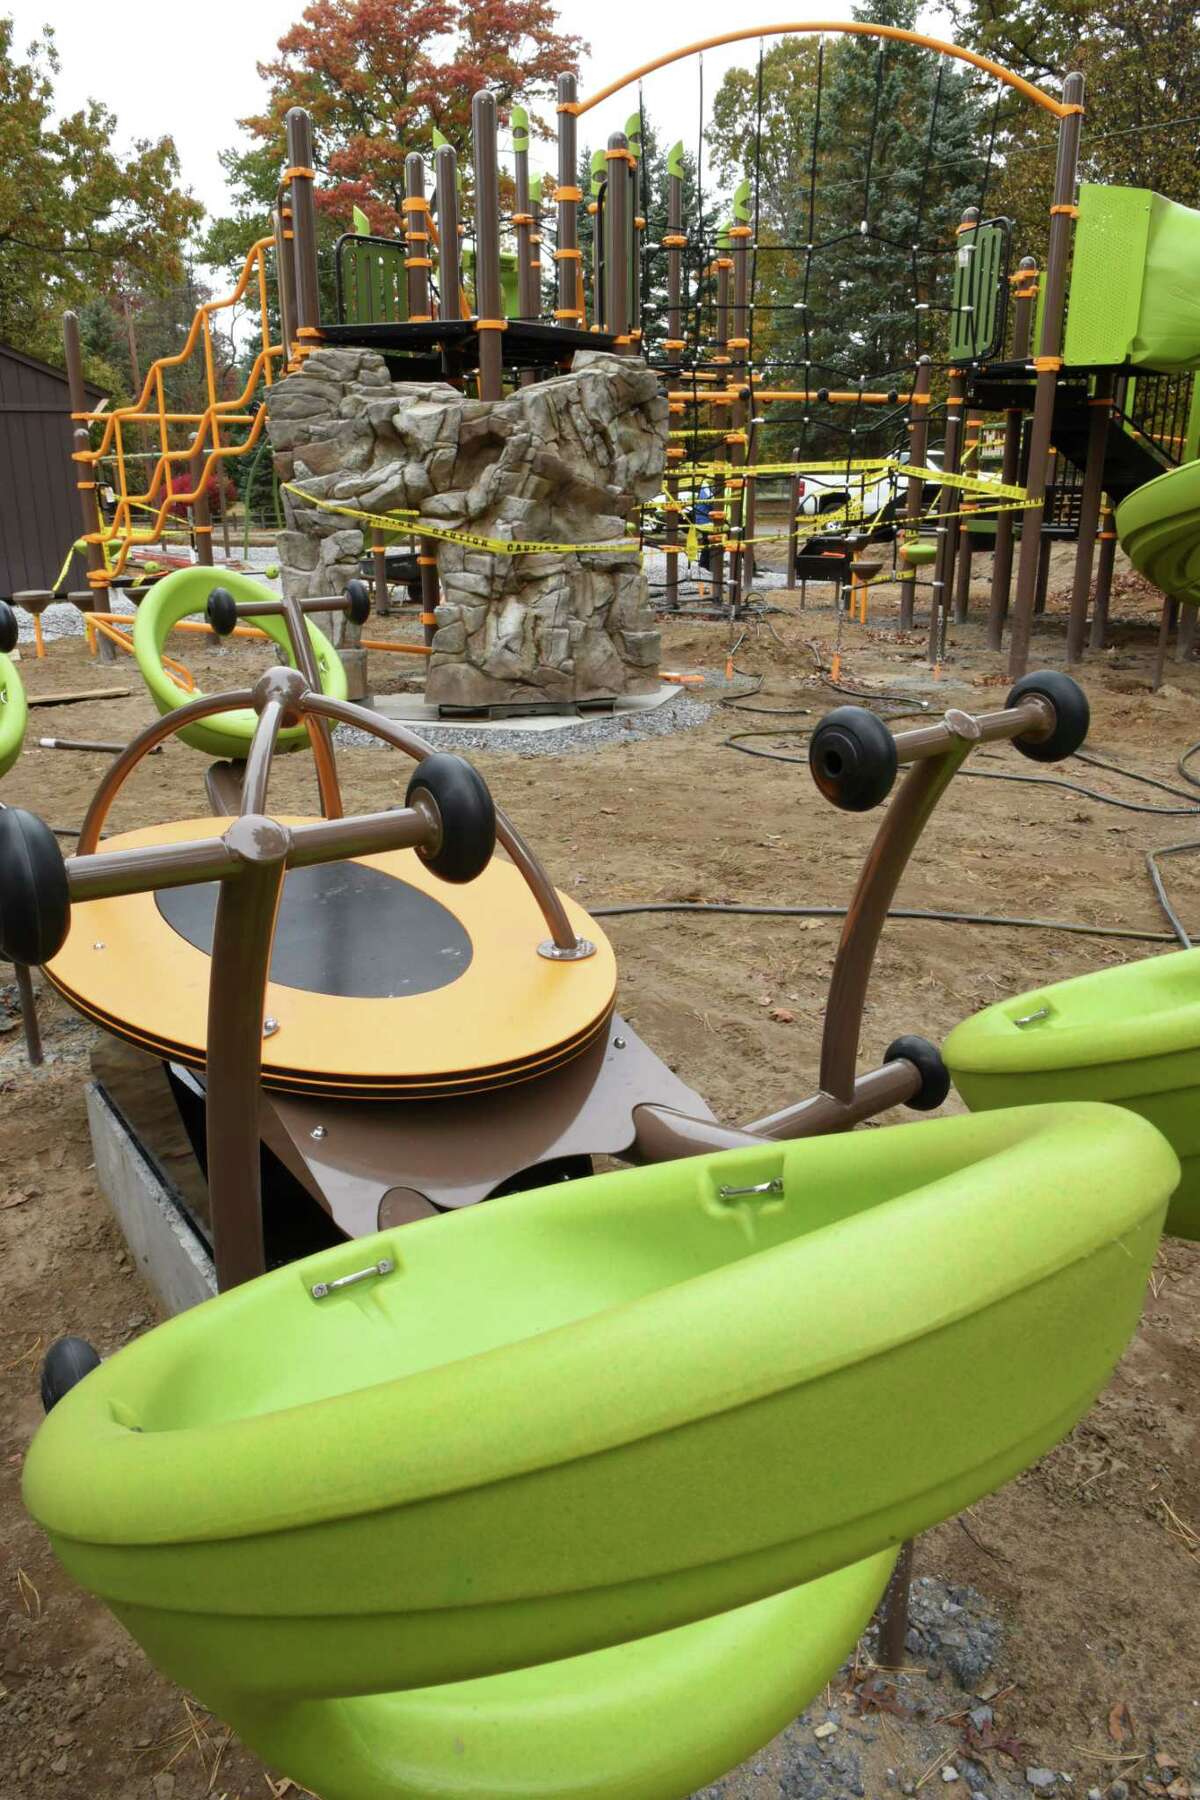 Colonie's Cook Park playground renovated to serve children of all abilities